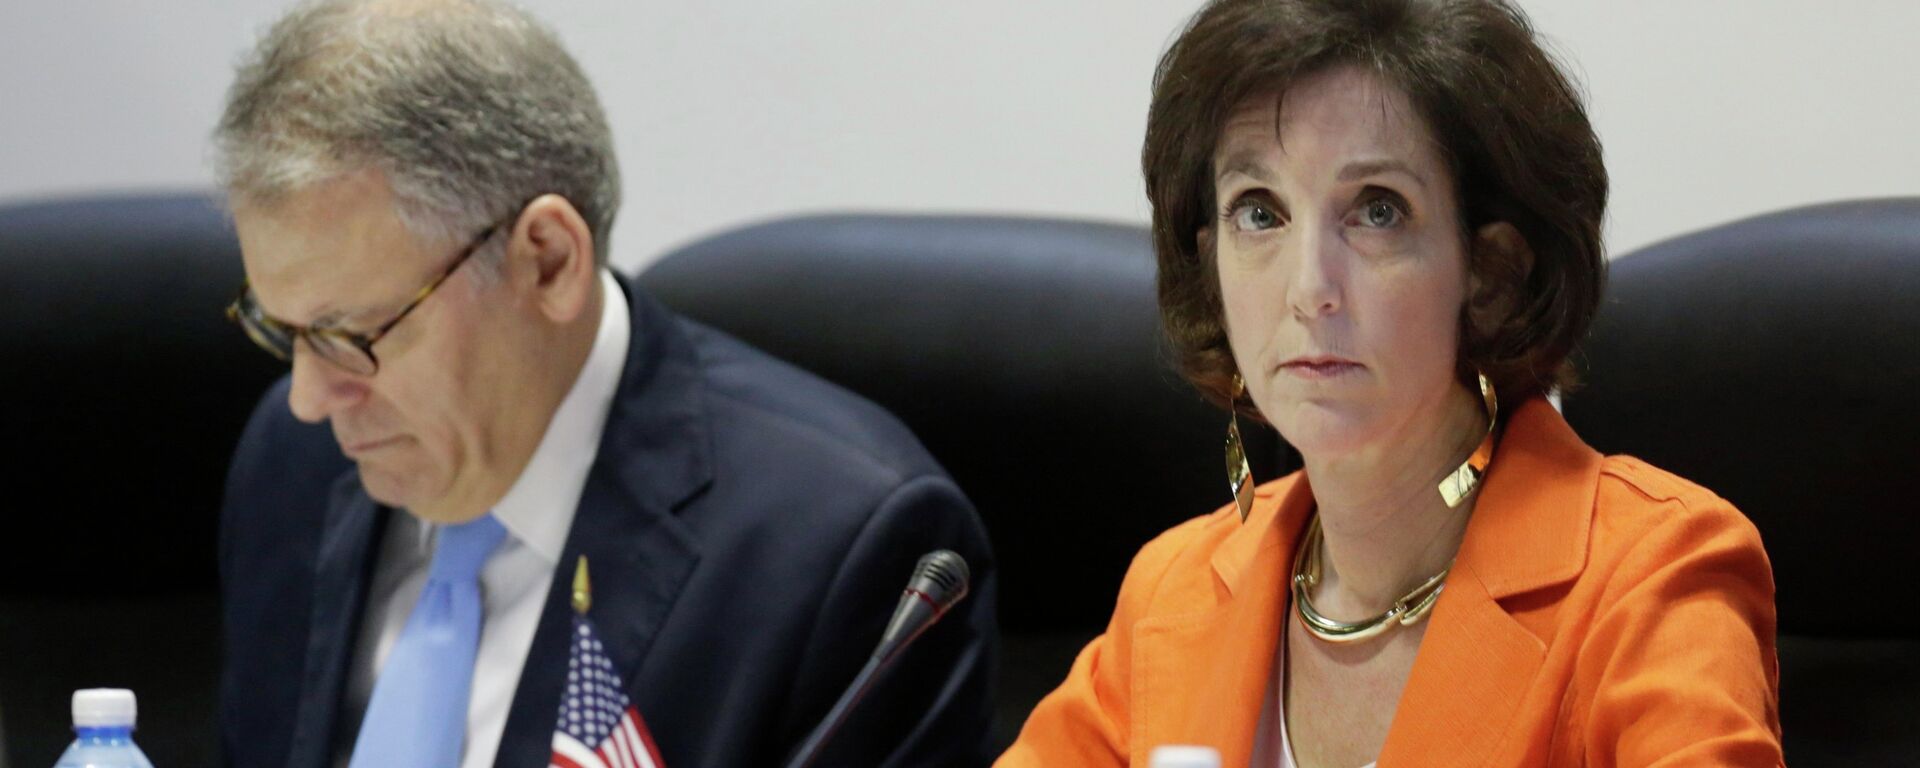 U.S. Assistant Secretary for Western Hemisphere Affairs Roberta Jacobson (R) and Chief of Mission at the U.S. Interests Section in Havana Jeffrey DeLaurentis attend negotiations to restore diplomatic ties with Cuba in Havana January 22, 2015. - Sputnik Mundo, 1920, 17.04.2021